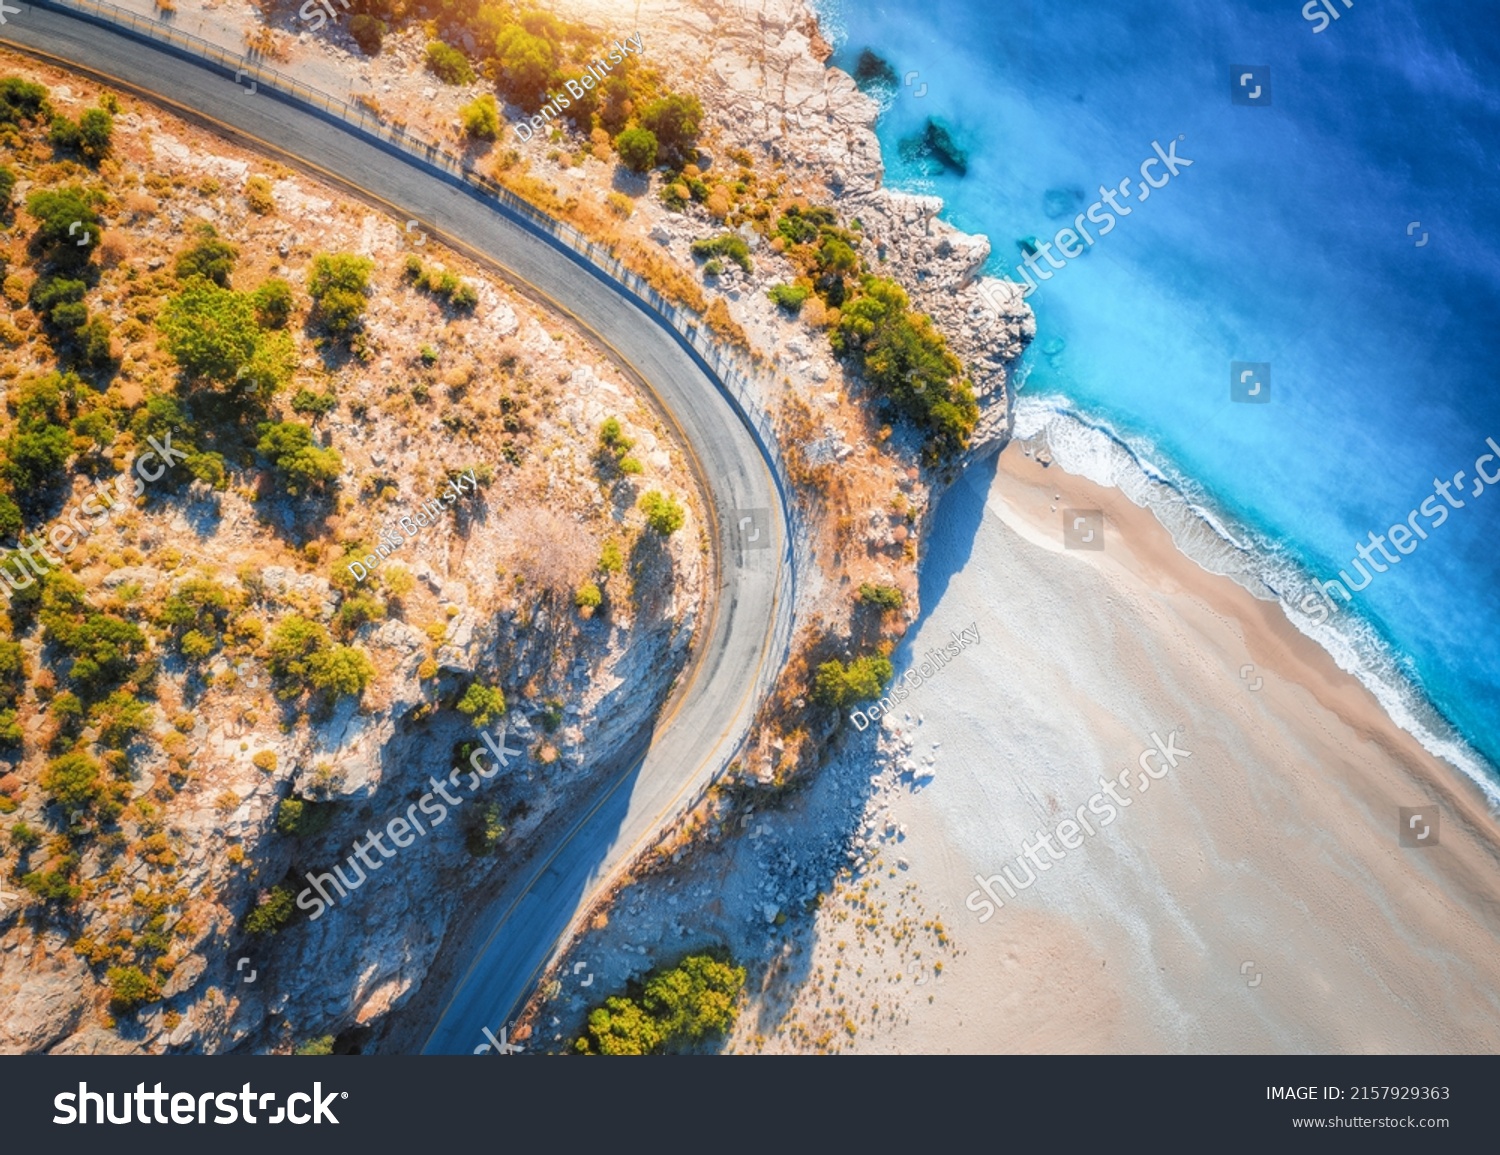 Aerial view of mountain road near blue sea with sandy beach at sunset in summer. Oludeniz, Turkey. Top view of road, trees, azure water, mountain. Beautiful landscape with highway, rocks, sea coast	 #2157929363